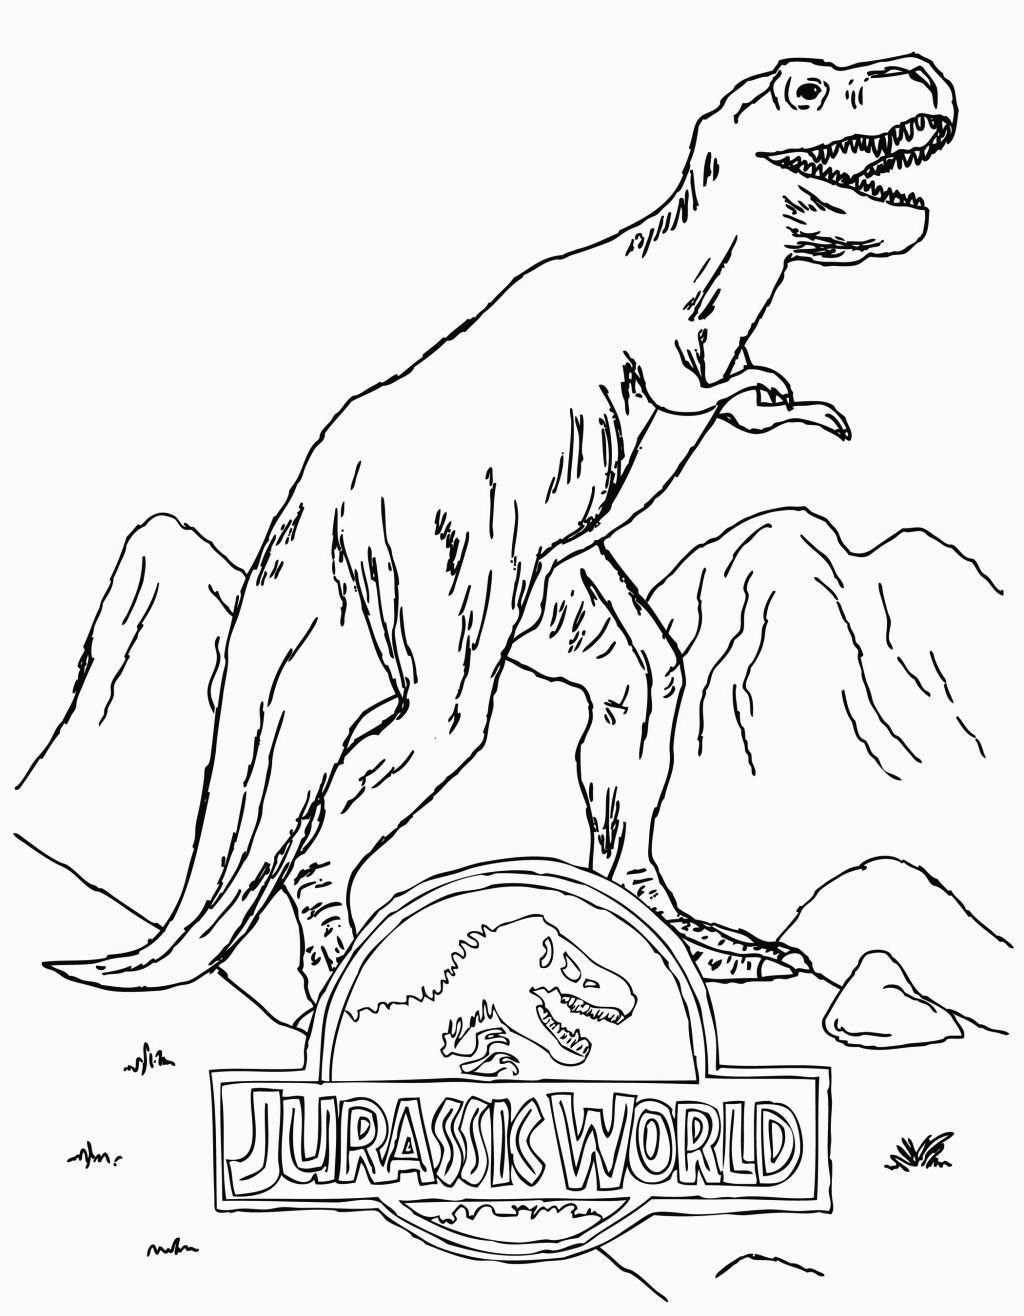 Jurassic World Coloring Pages   Best Coloring Pages For Kids